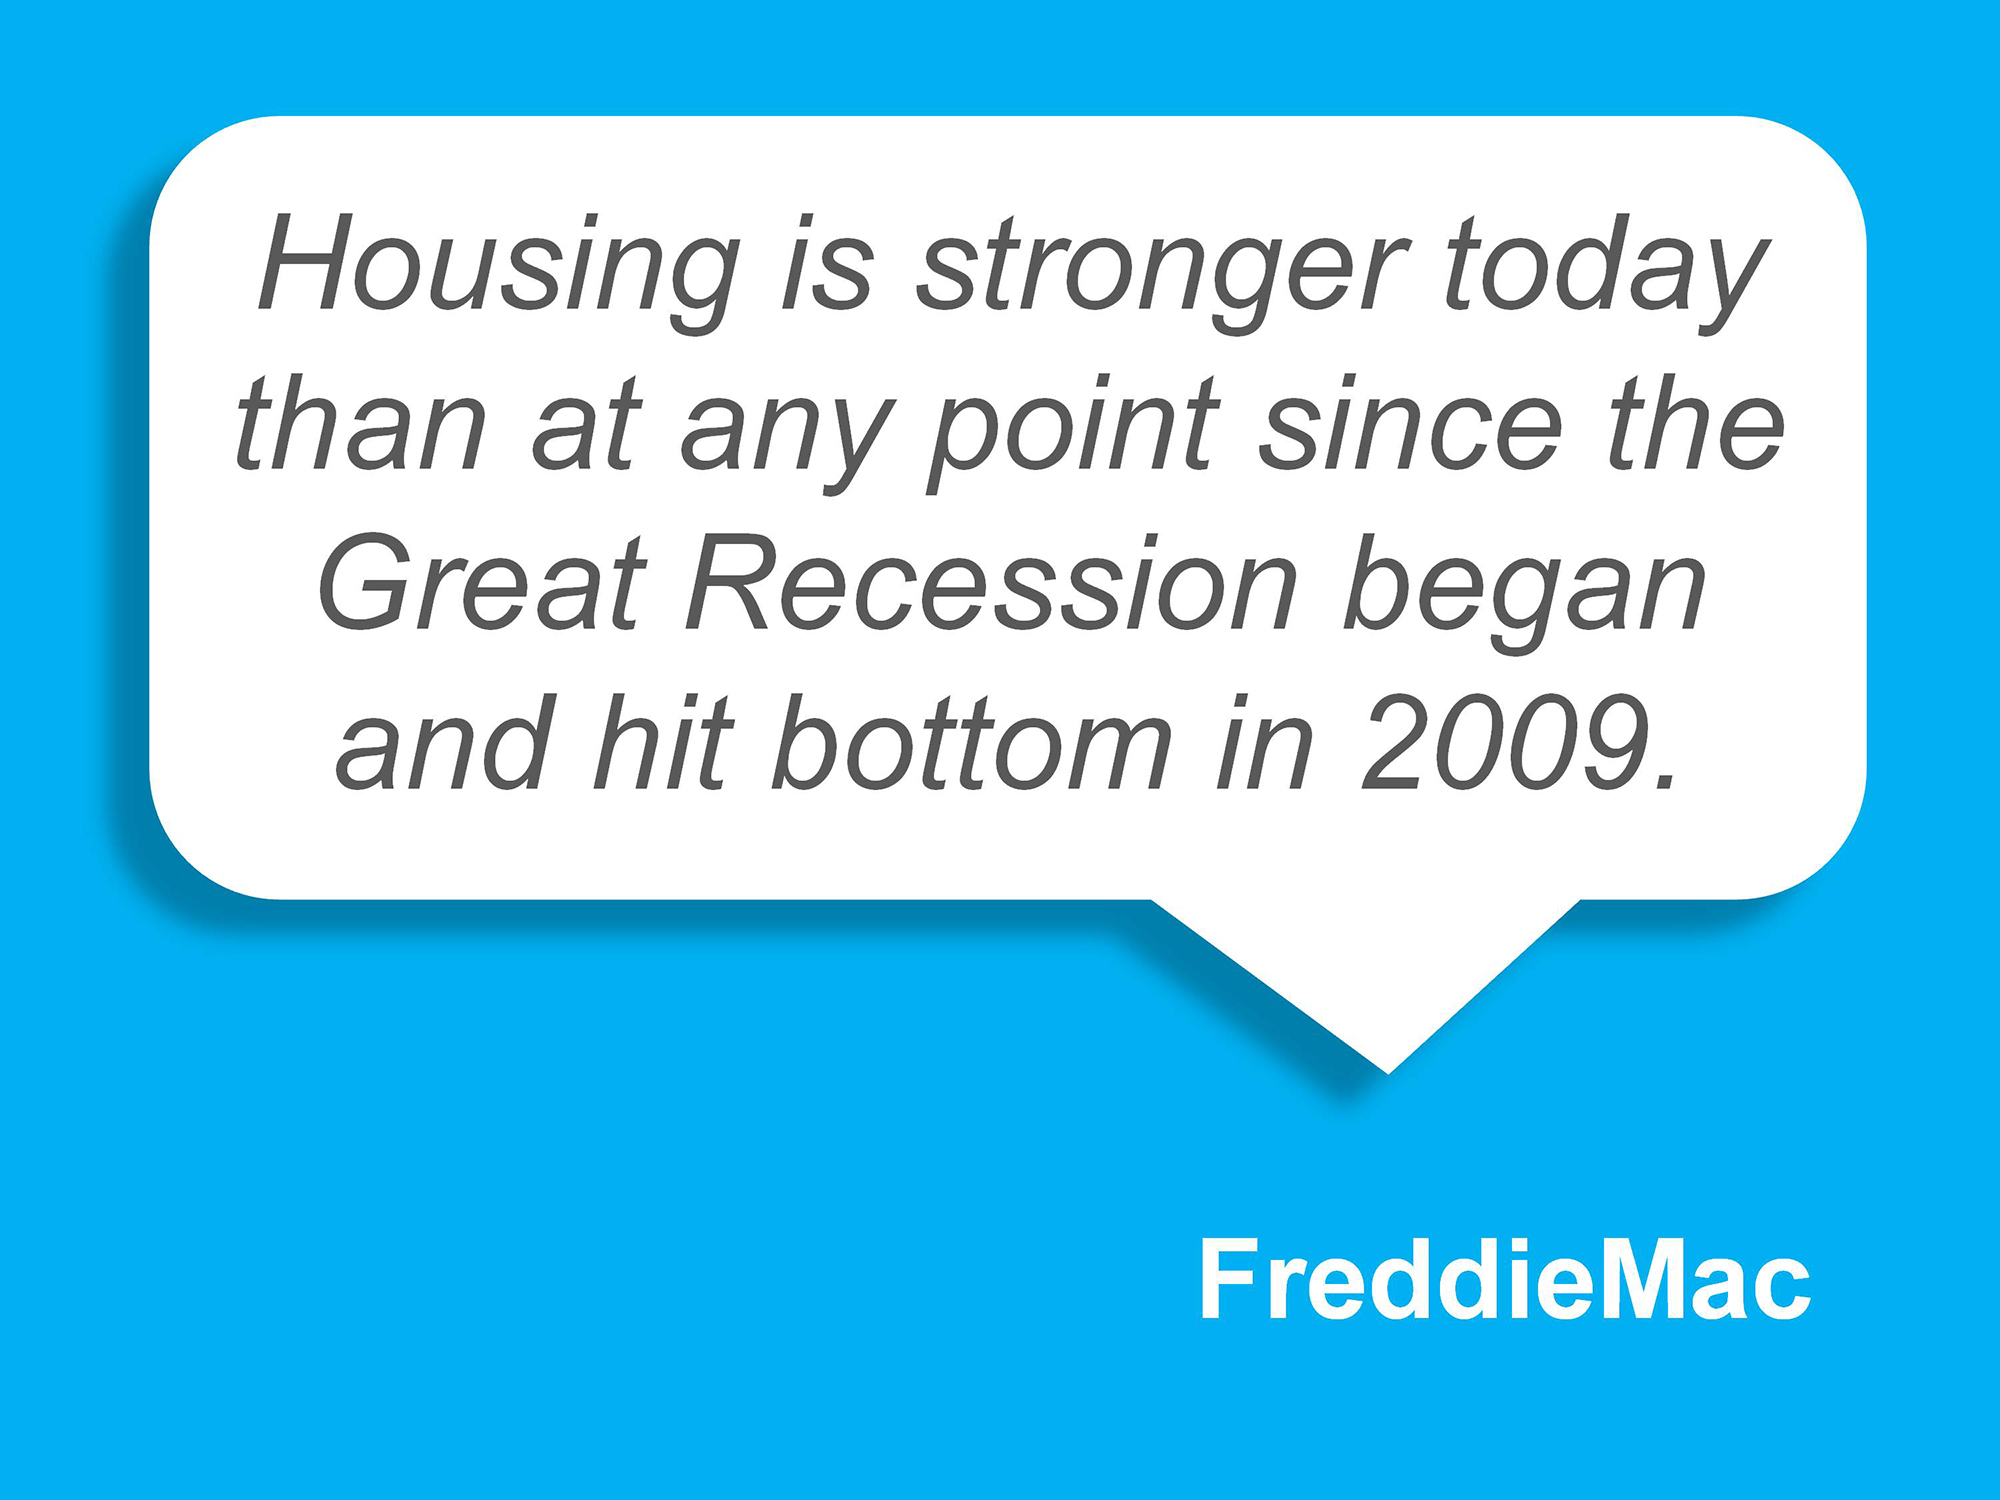 housing_is_a_great_investment_may2014-11_2000